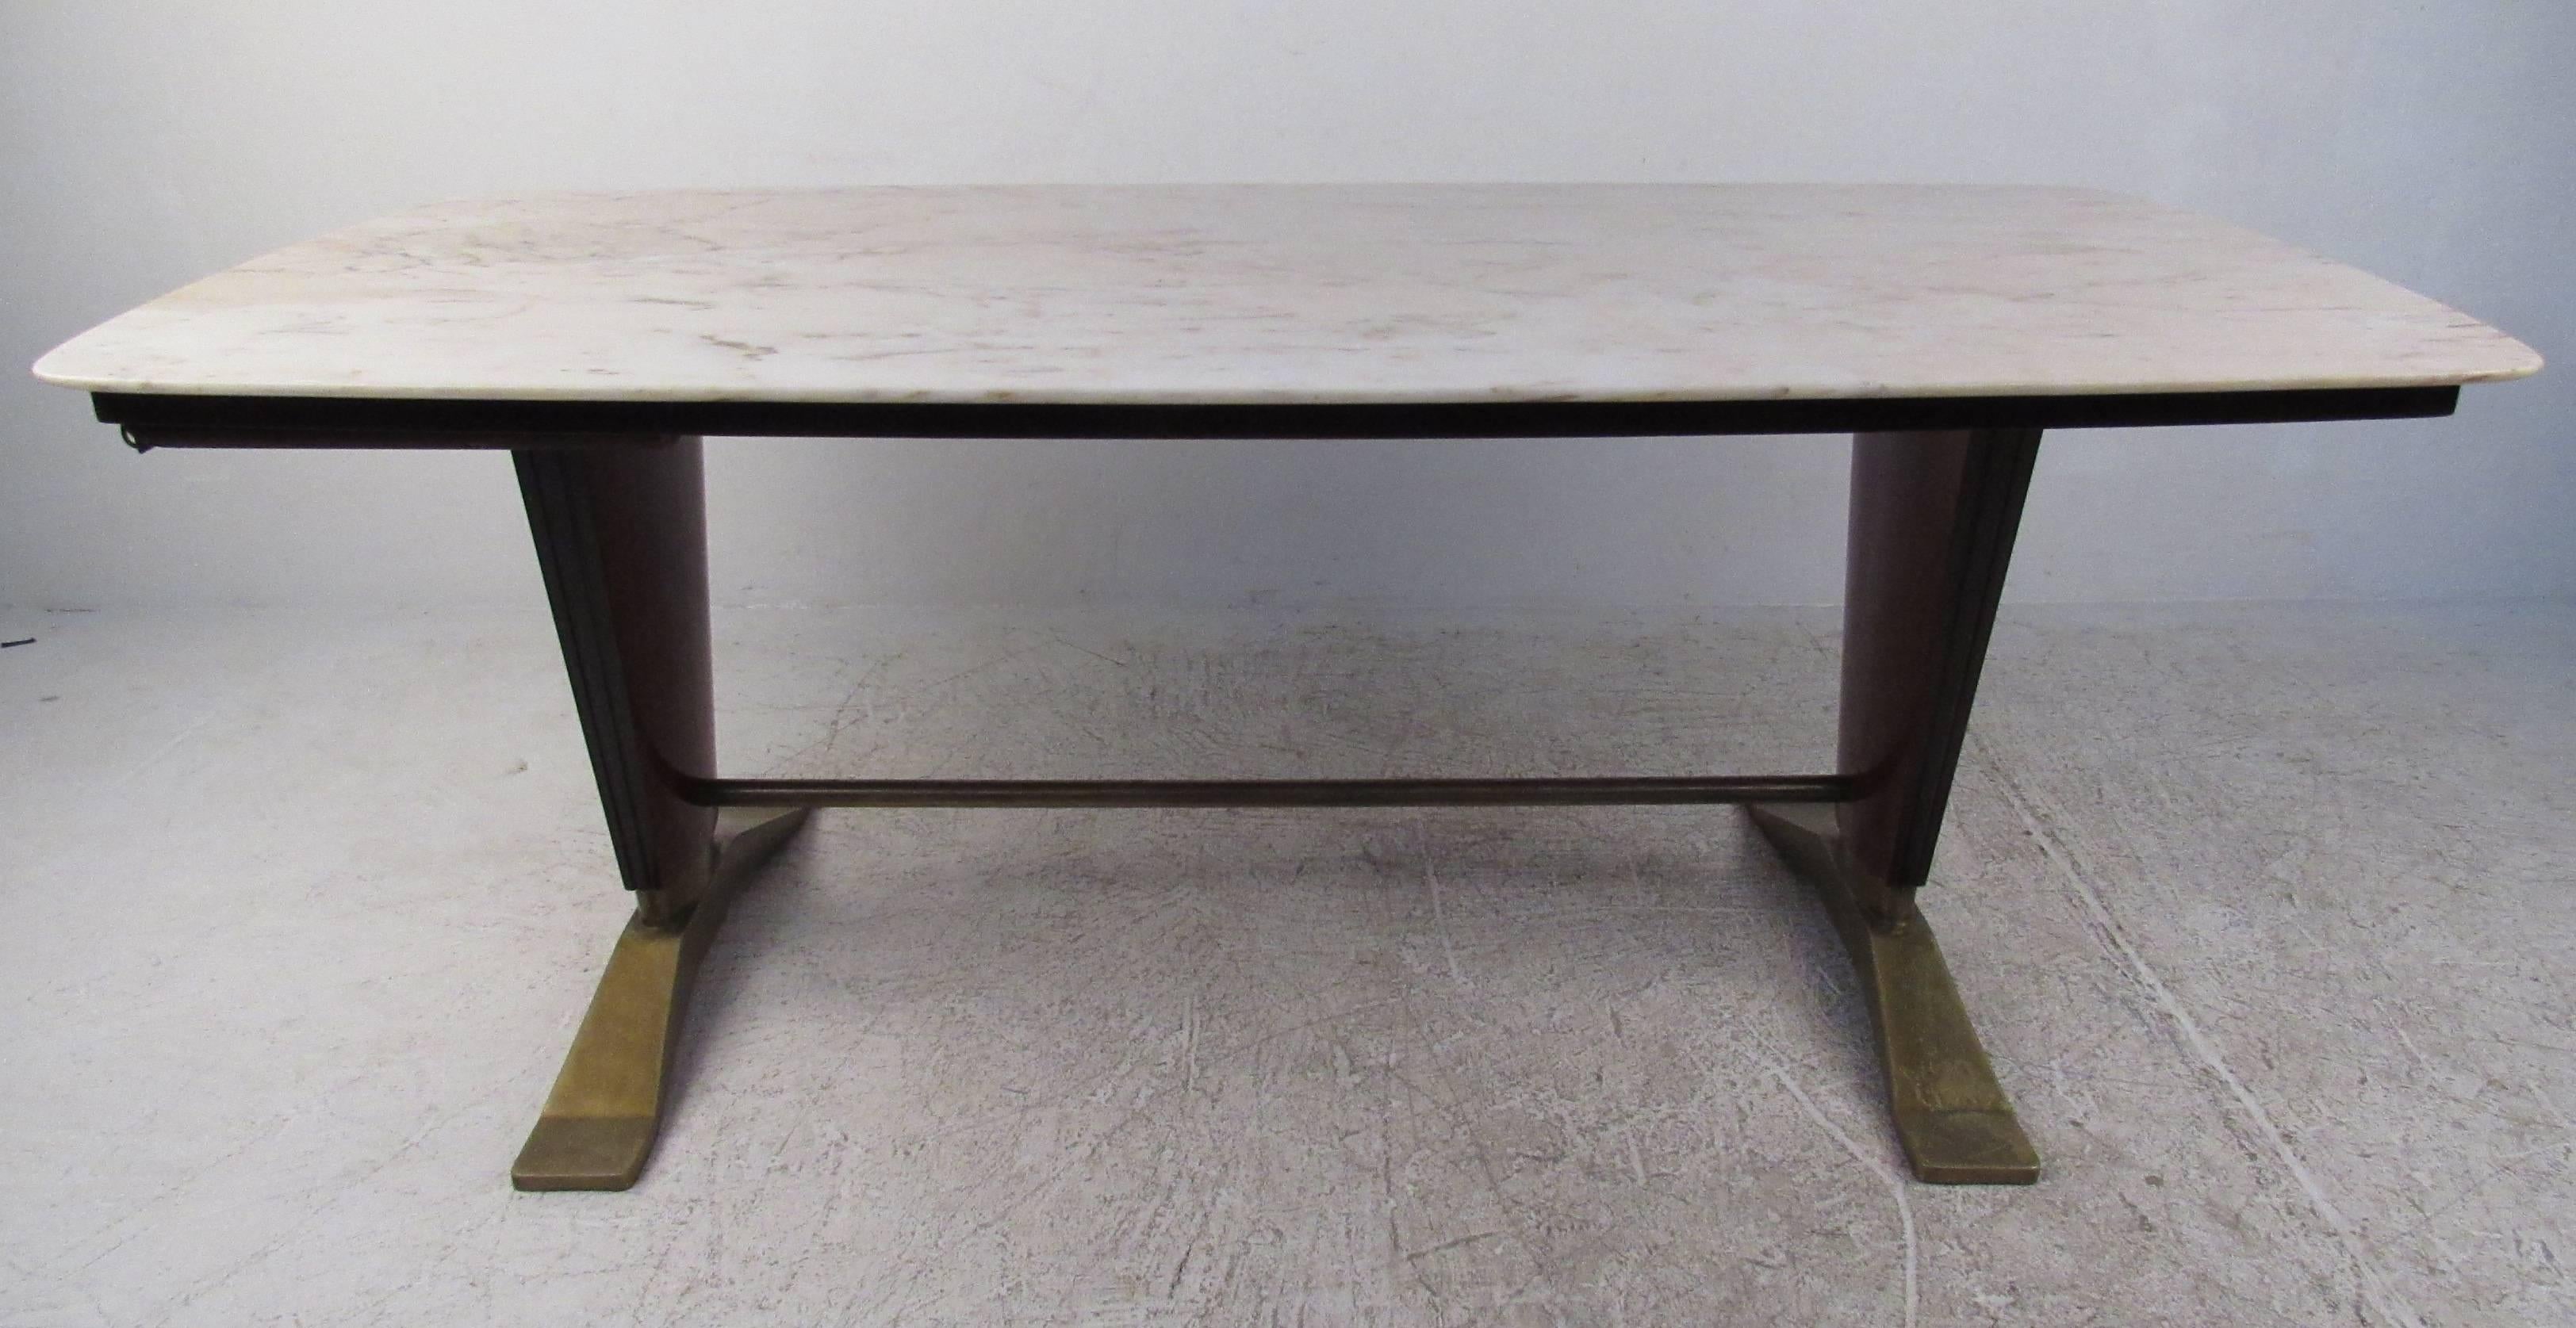 This elegant Italian marble-top dining table supported by teak ebonized legs with brass base and stretcher.  Stylish mid-century dining table for any luxury dining room. Please confirm item location (NY or NJ) with dealer.
              